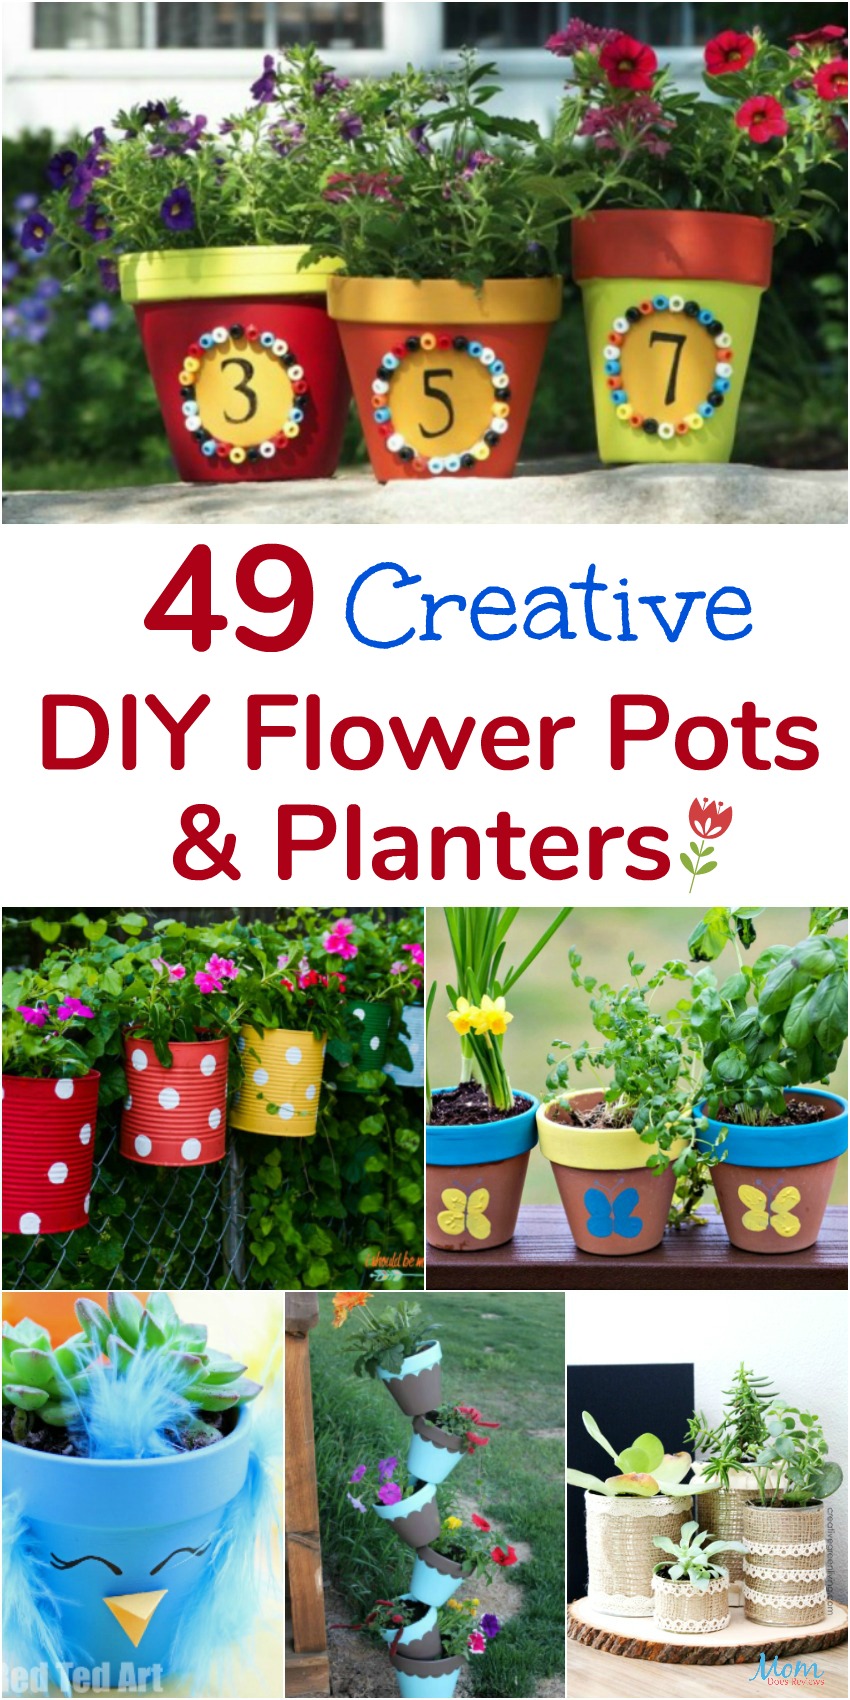 49 Creative Diy Flower Pots And Planters That Are Fun And Unique Mom Does Reviews